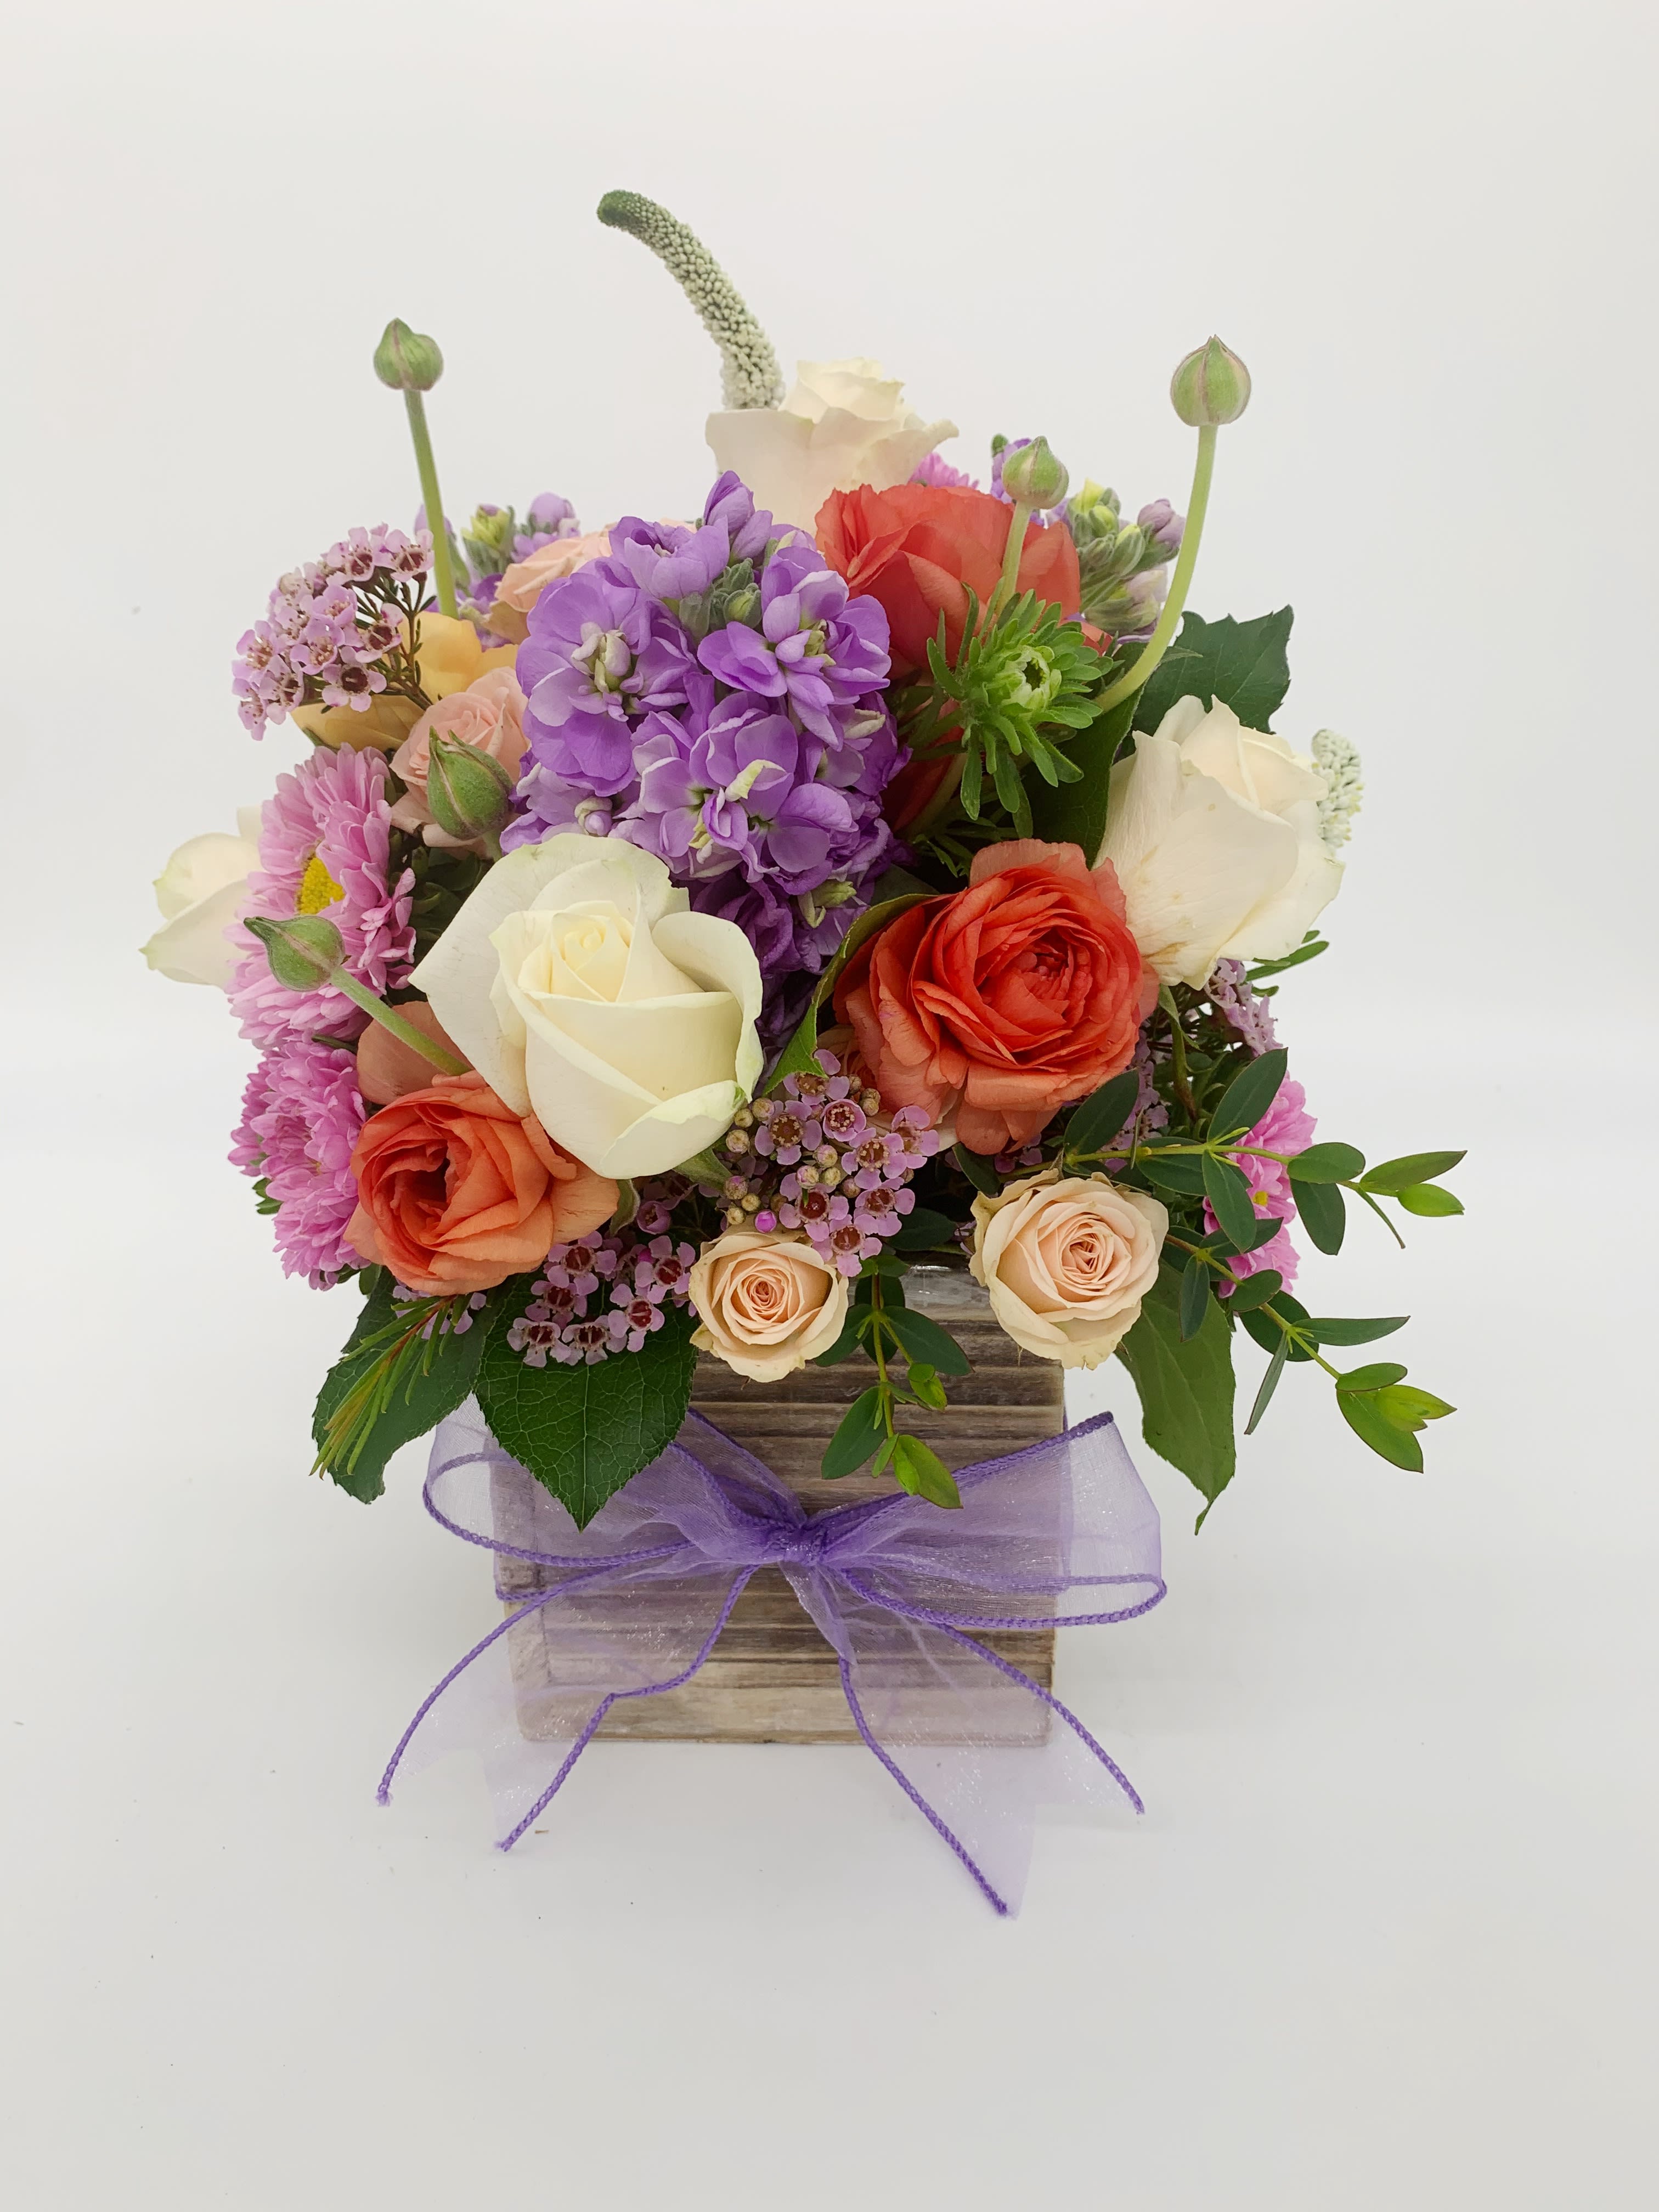 LF220 - Purple Pleasure - A beautiful all the way around arrangement.  This classic has white roses, ranunculus, spray roses, asters and stock. It's very feminine in a rustic wooden box. The purple ribbon is a perfect finishing touch.    Orientation:  All around